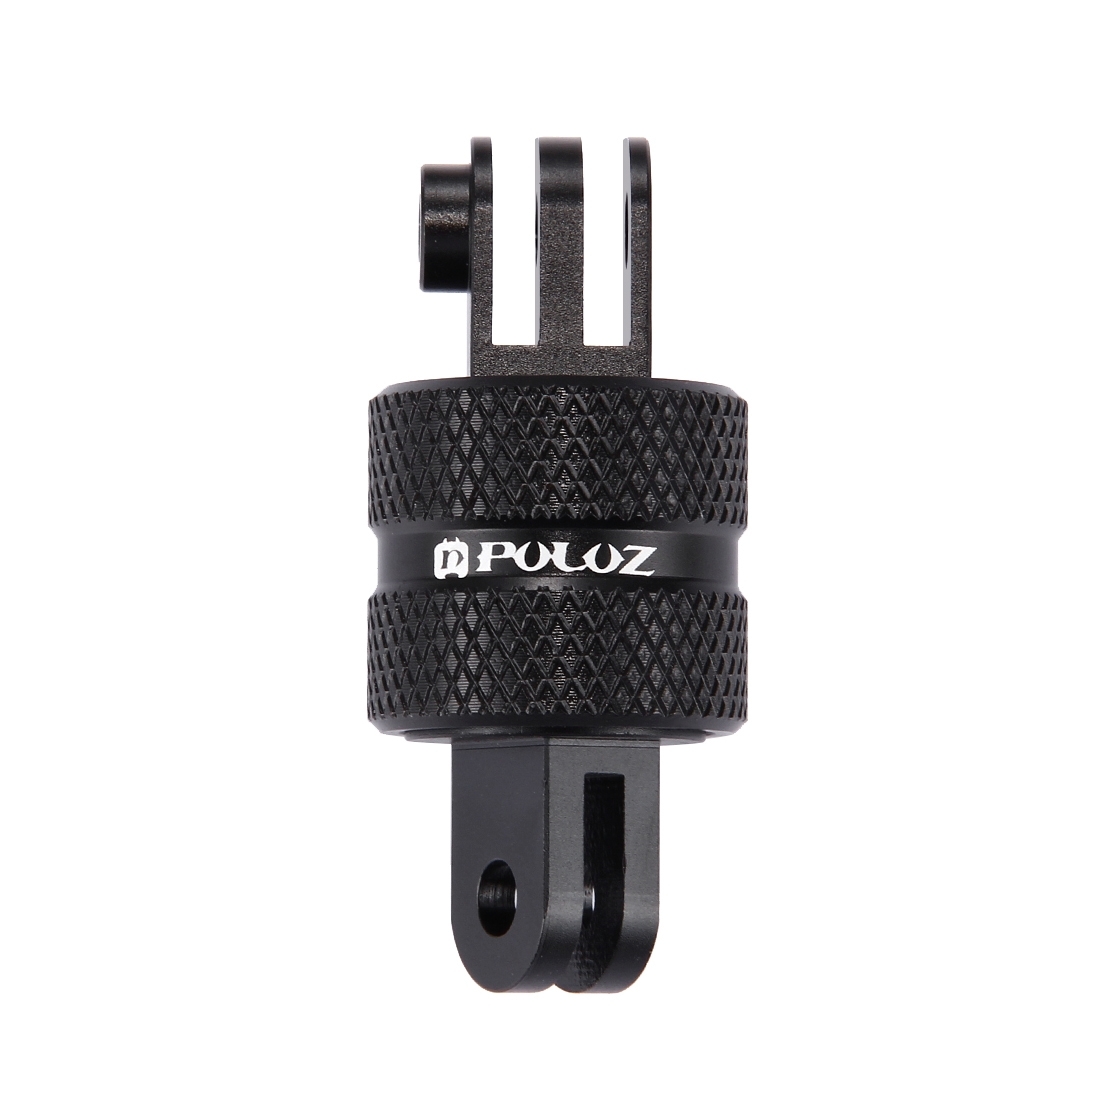 PULUZ 360 Degree Rotation CNC Swivel Pivot Extension Arm Tripod Mount for GoPro, Xiaoyi and other Sp